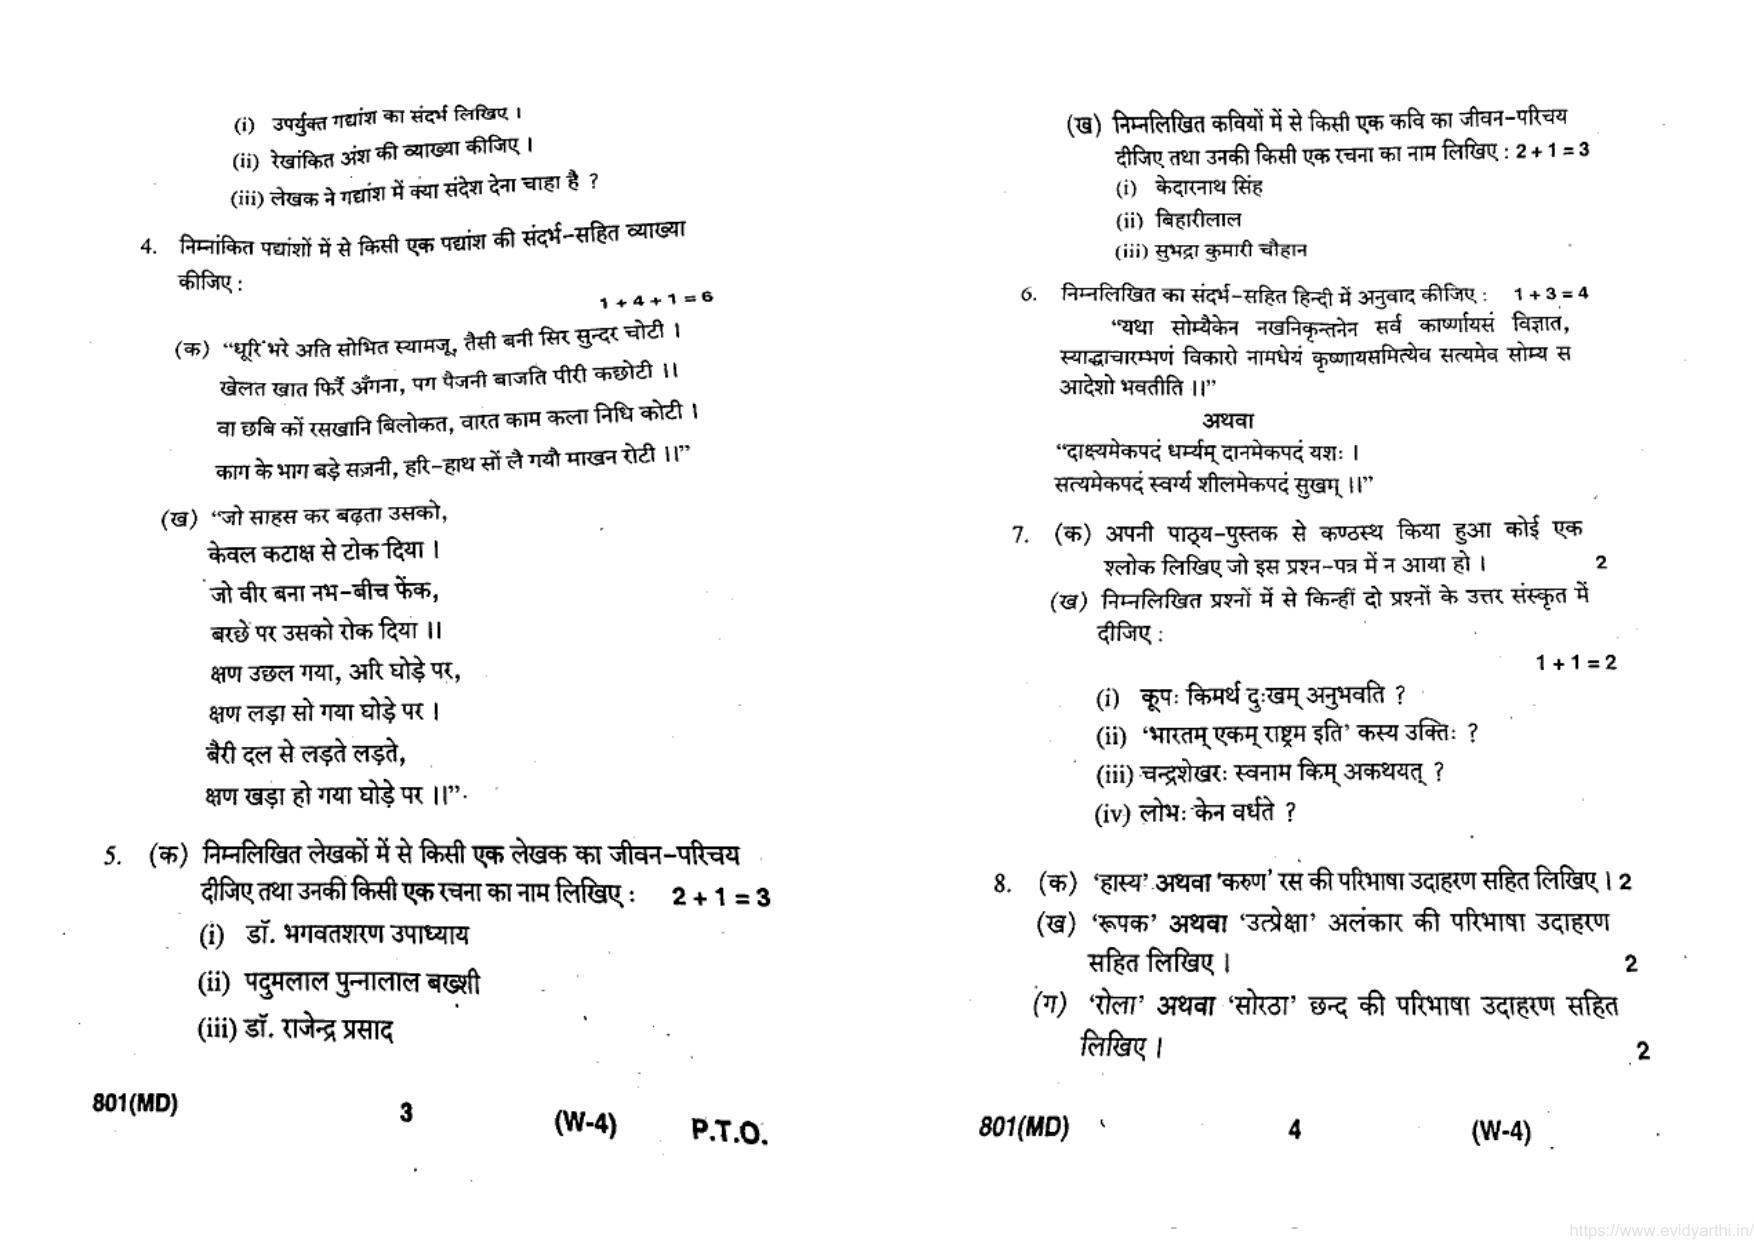 UP Board Previous Year Question Paper Class 10 Hindi (801 MD) – 2020 - Page 2